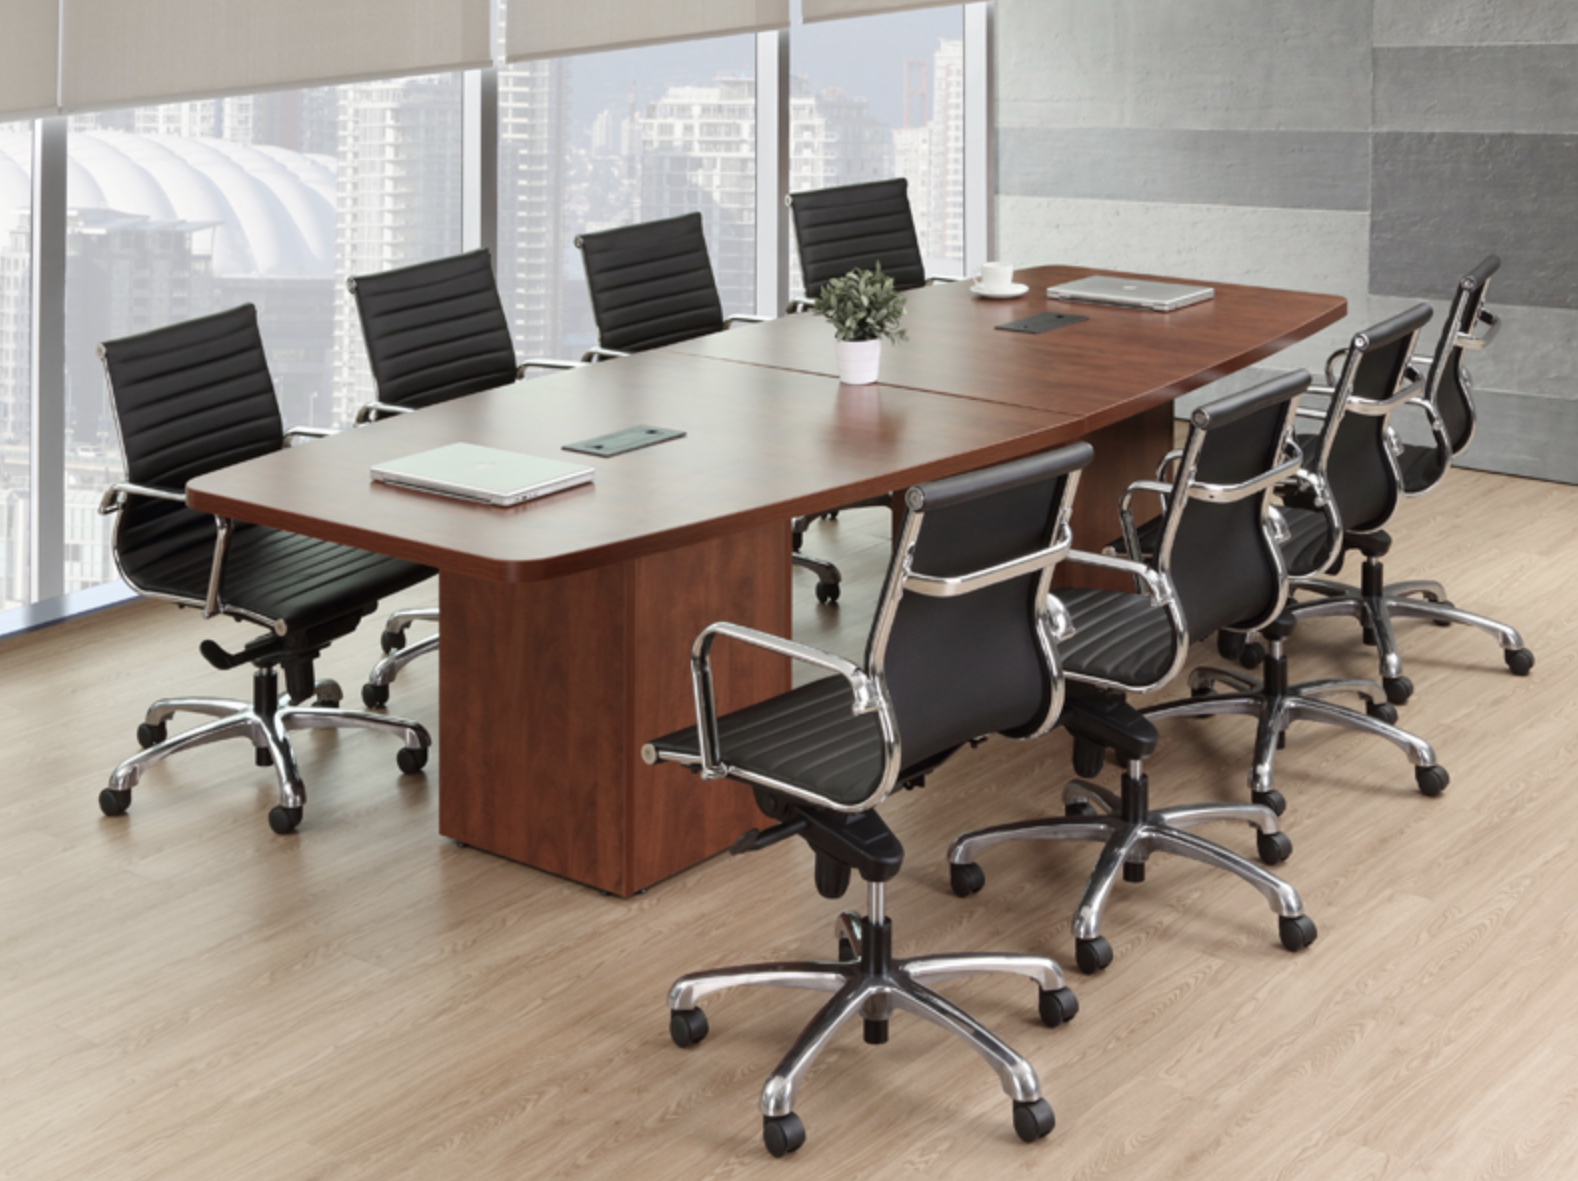 Boat Shape Conference Table with Cube Base